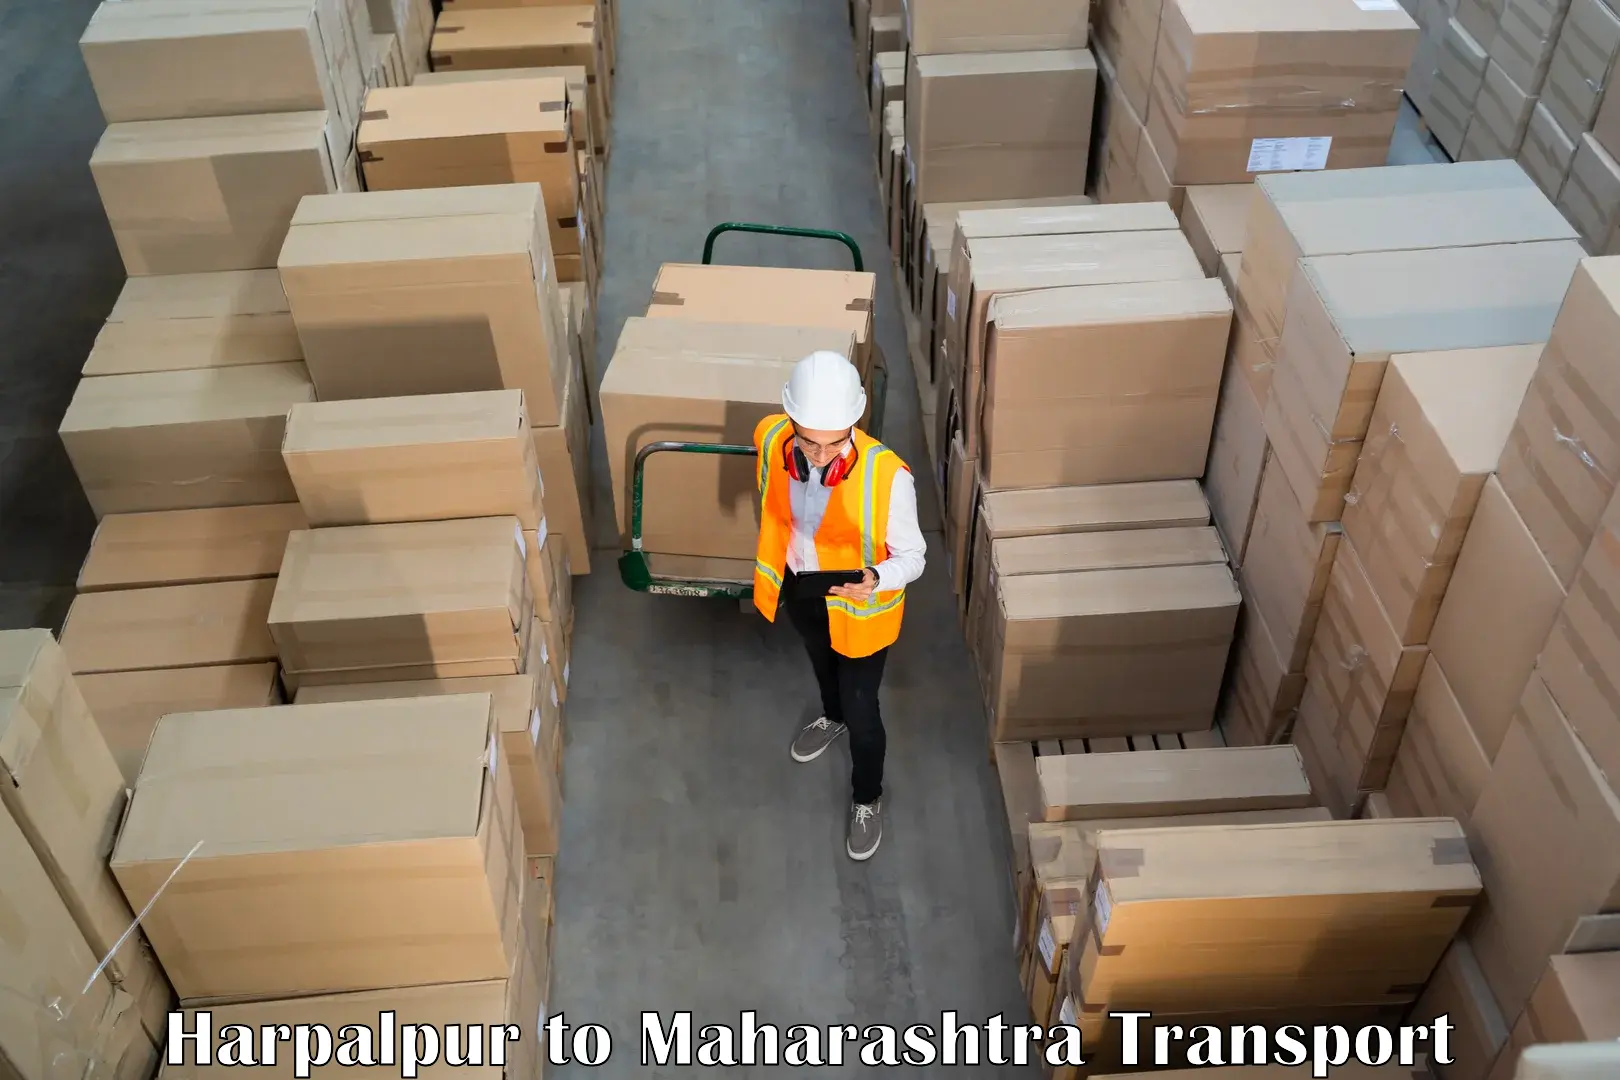 Daily parcel service transport Harpalpur to Mantha